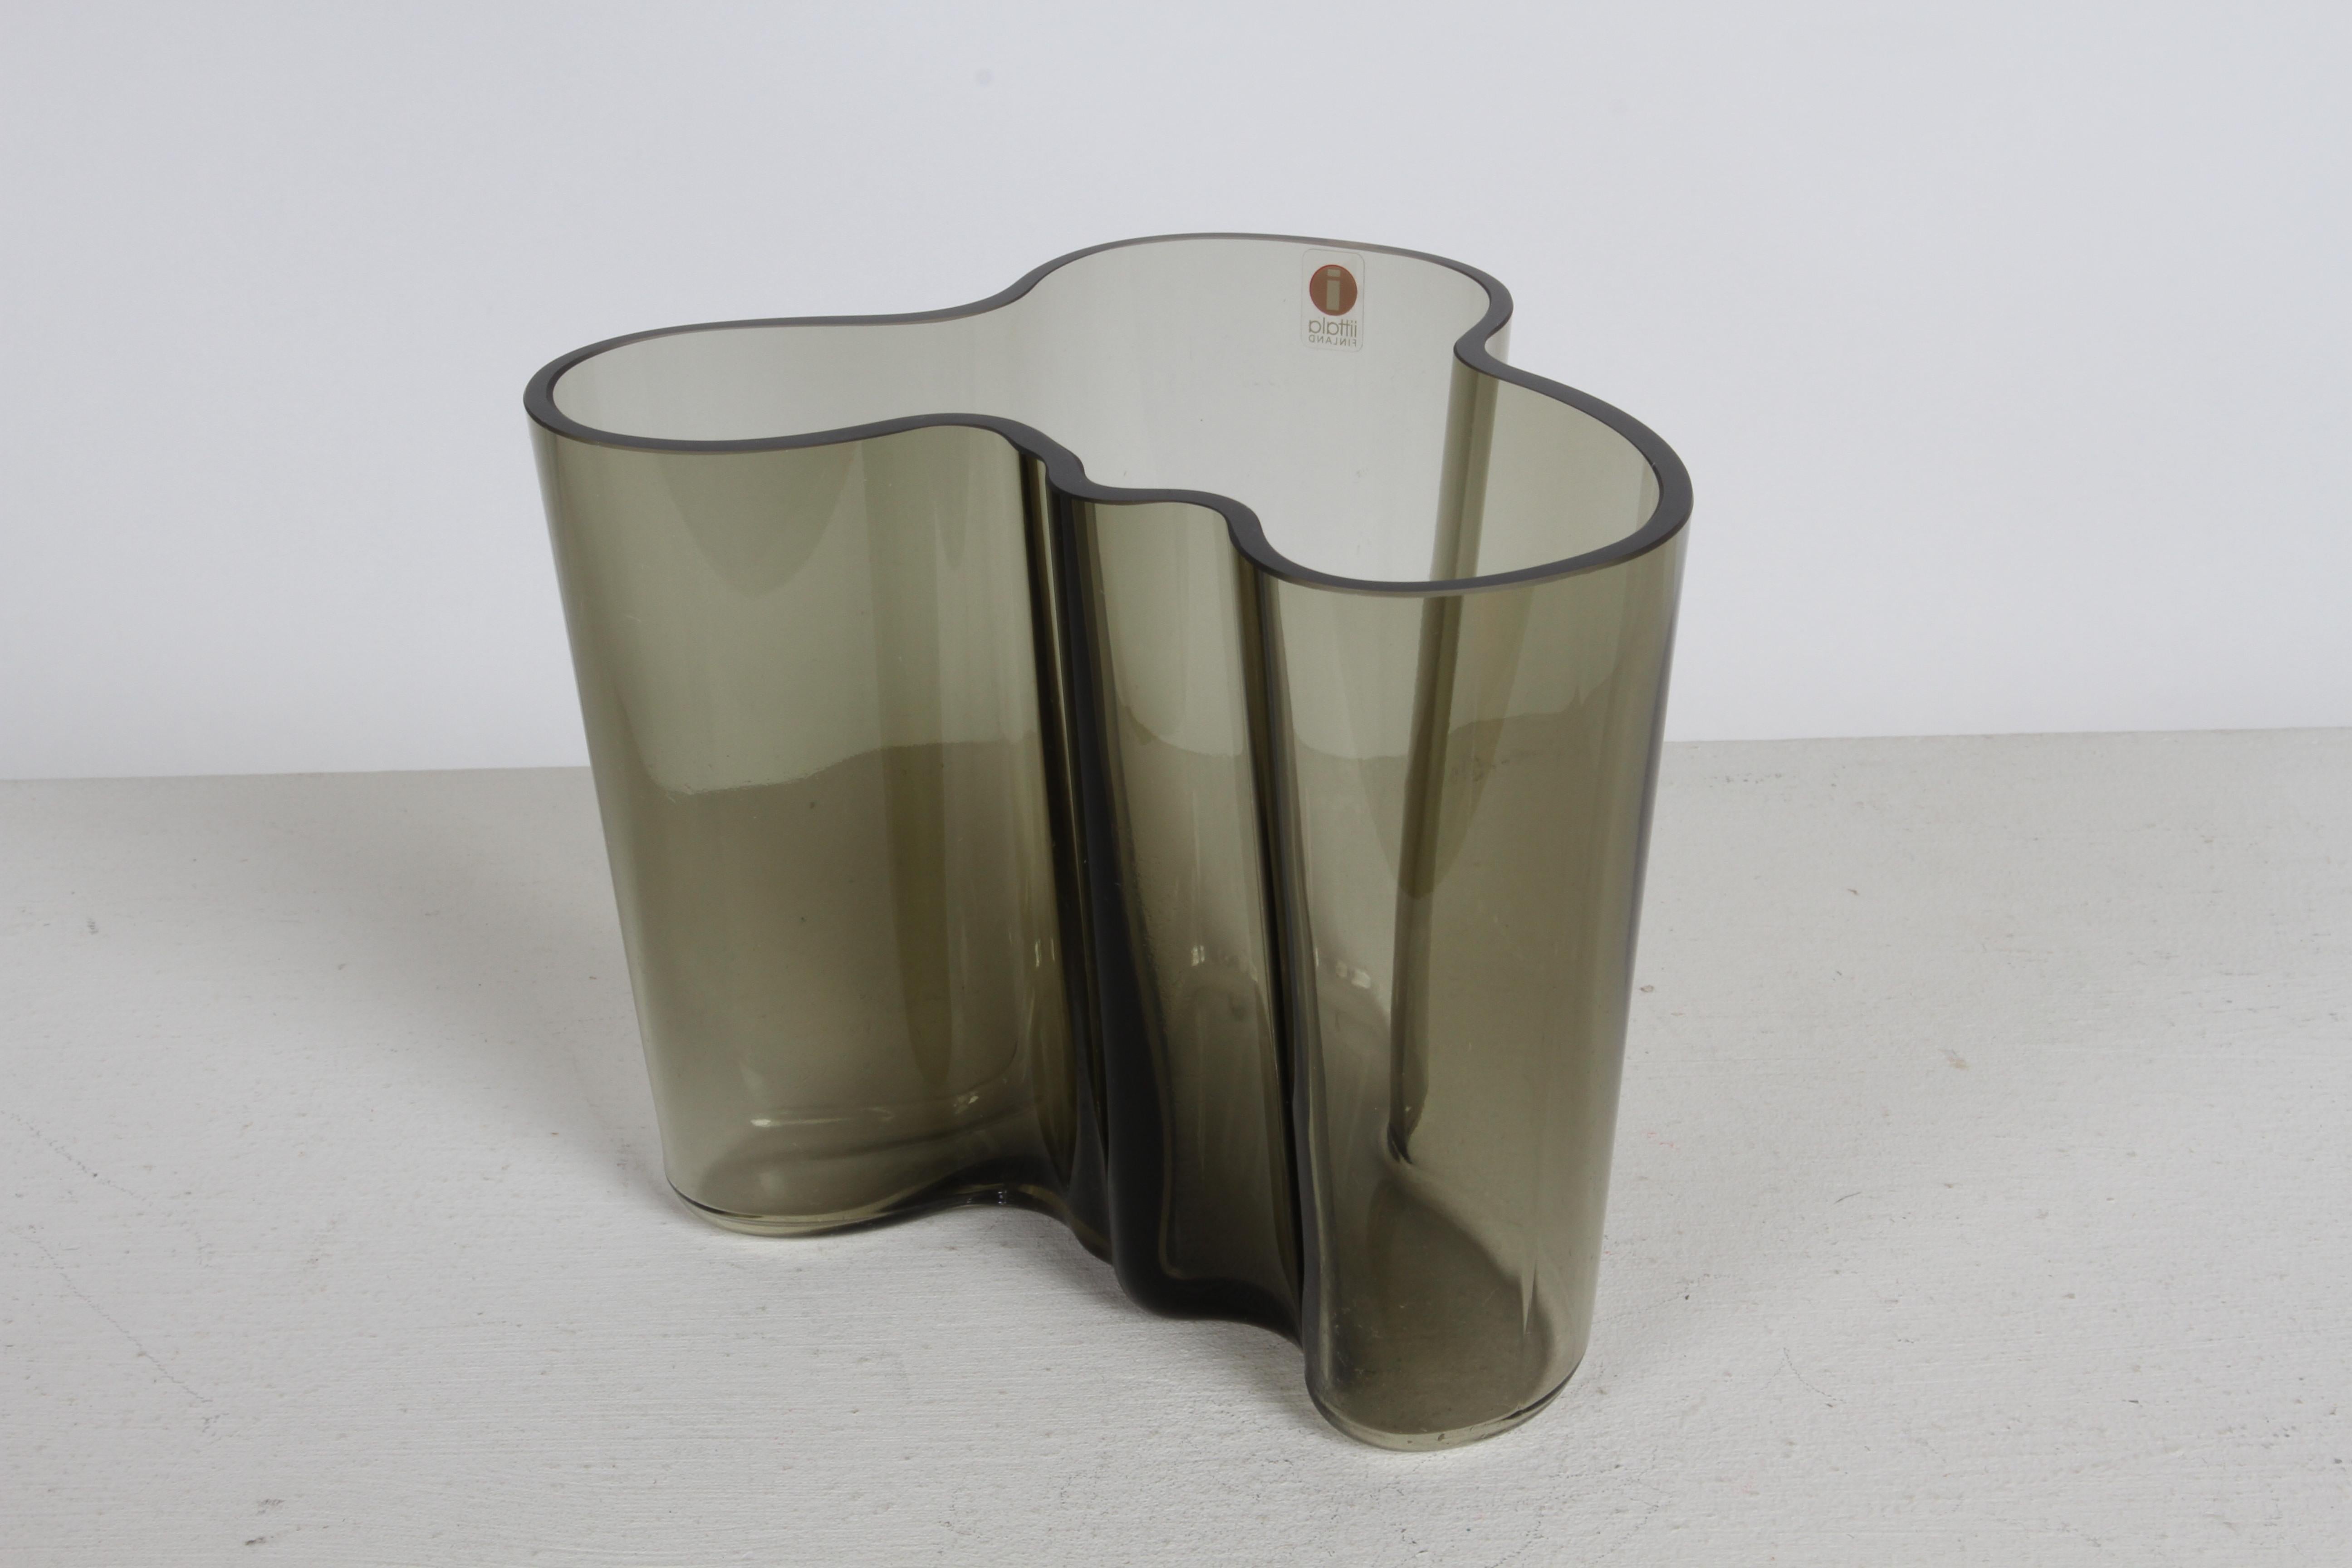 1970s MCM Alvar Aalto Savoy Vase 3030 in Smoke Gray Glass by Iittala Finland For Sale 1